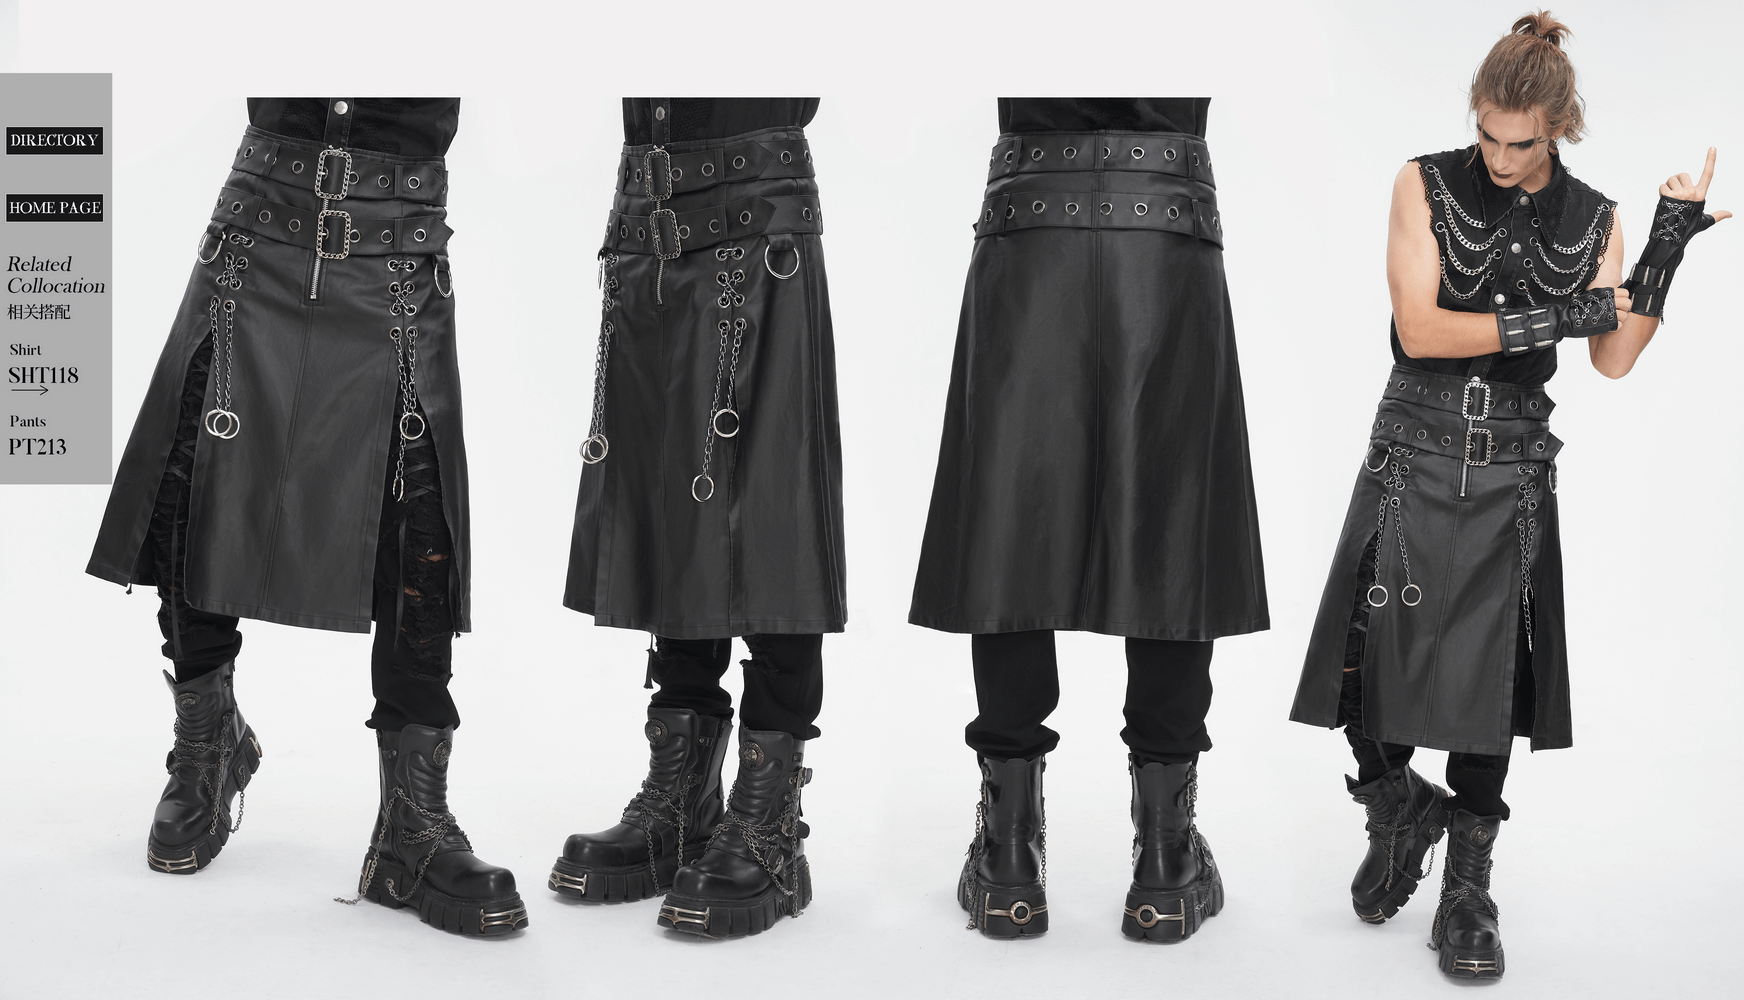 Gothic Black Kilt with Chains and Metal Details